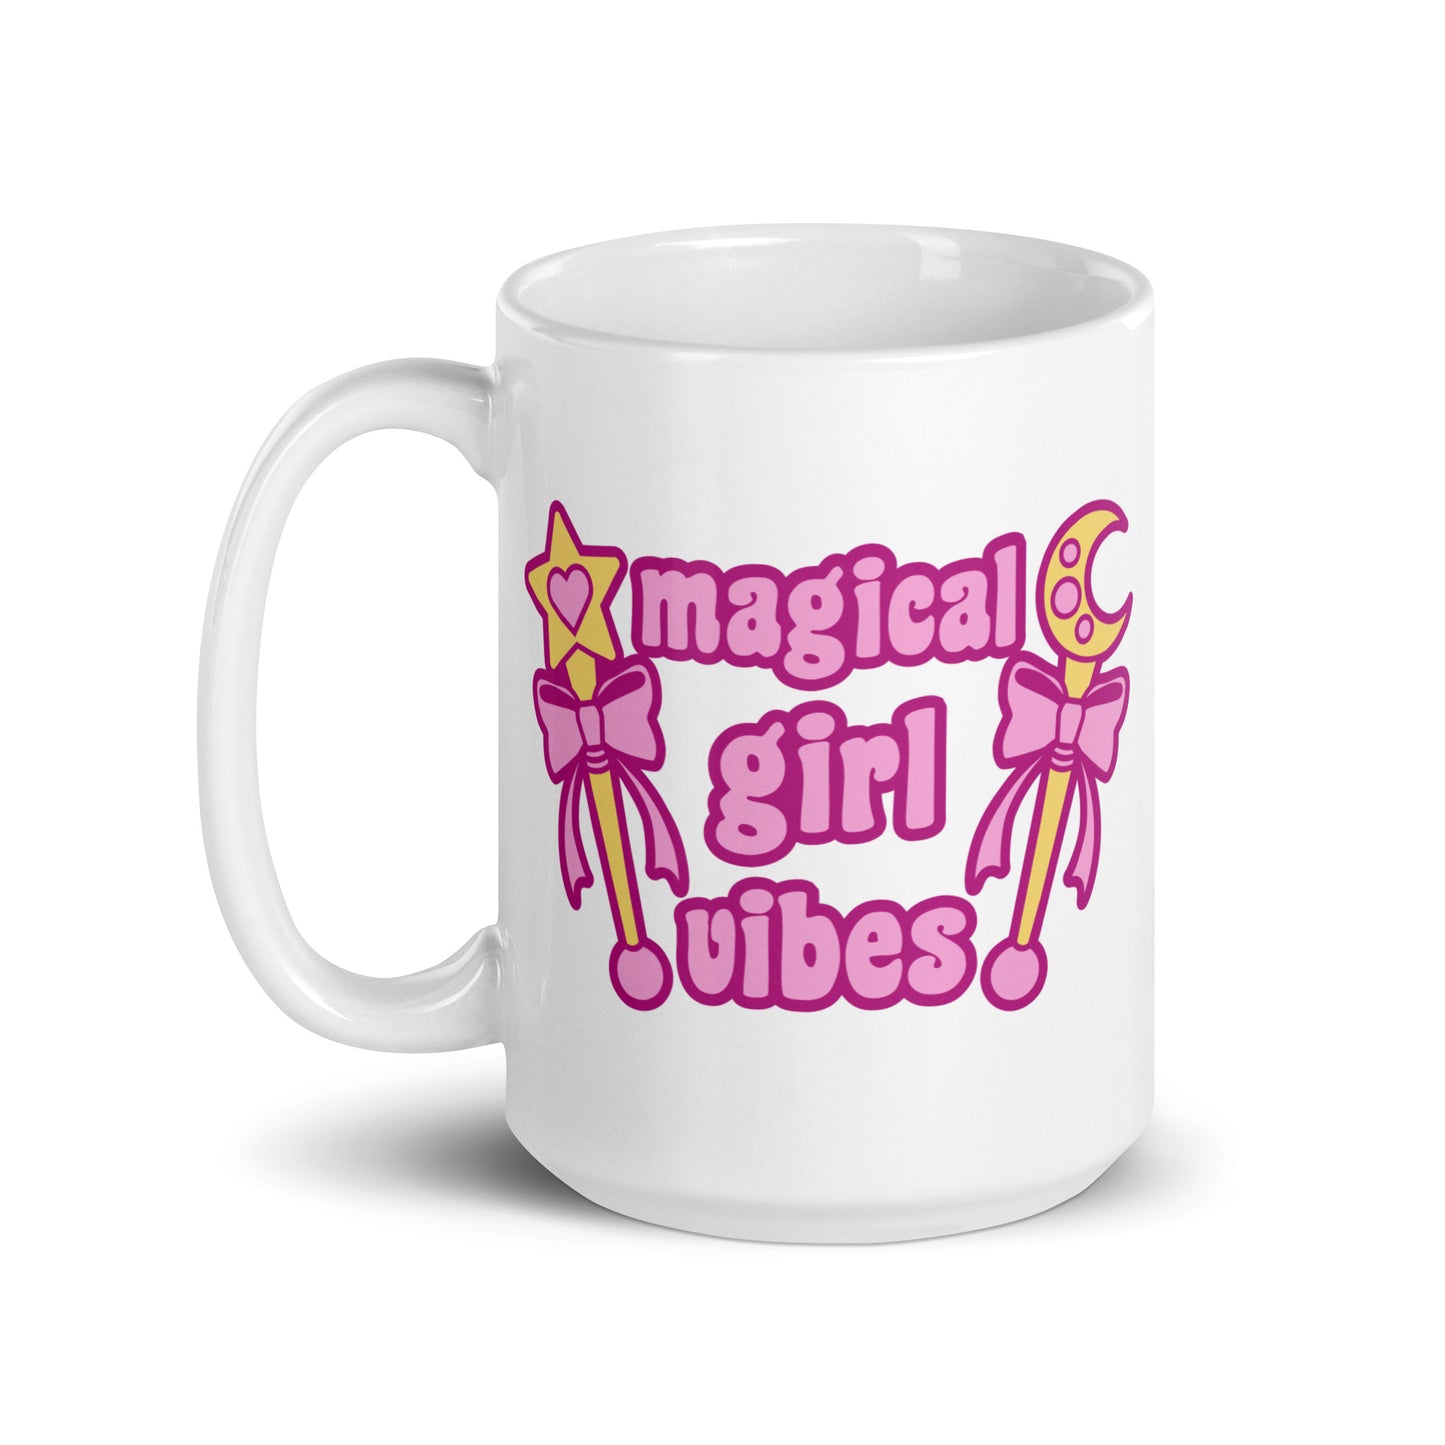 An 15 oz white ceramic mug with the handle to the left featuring two gold wands with pink bows and pink text reading "Magical girl vibes"